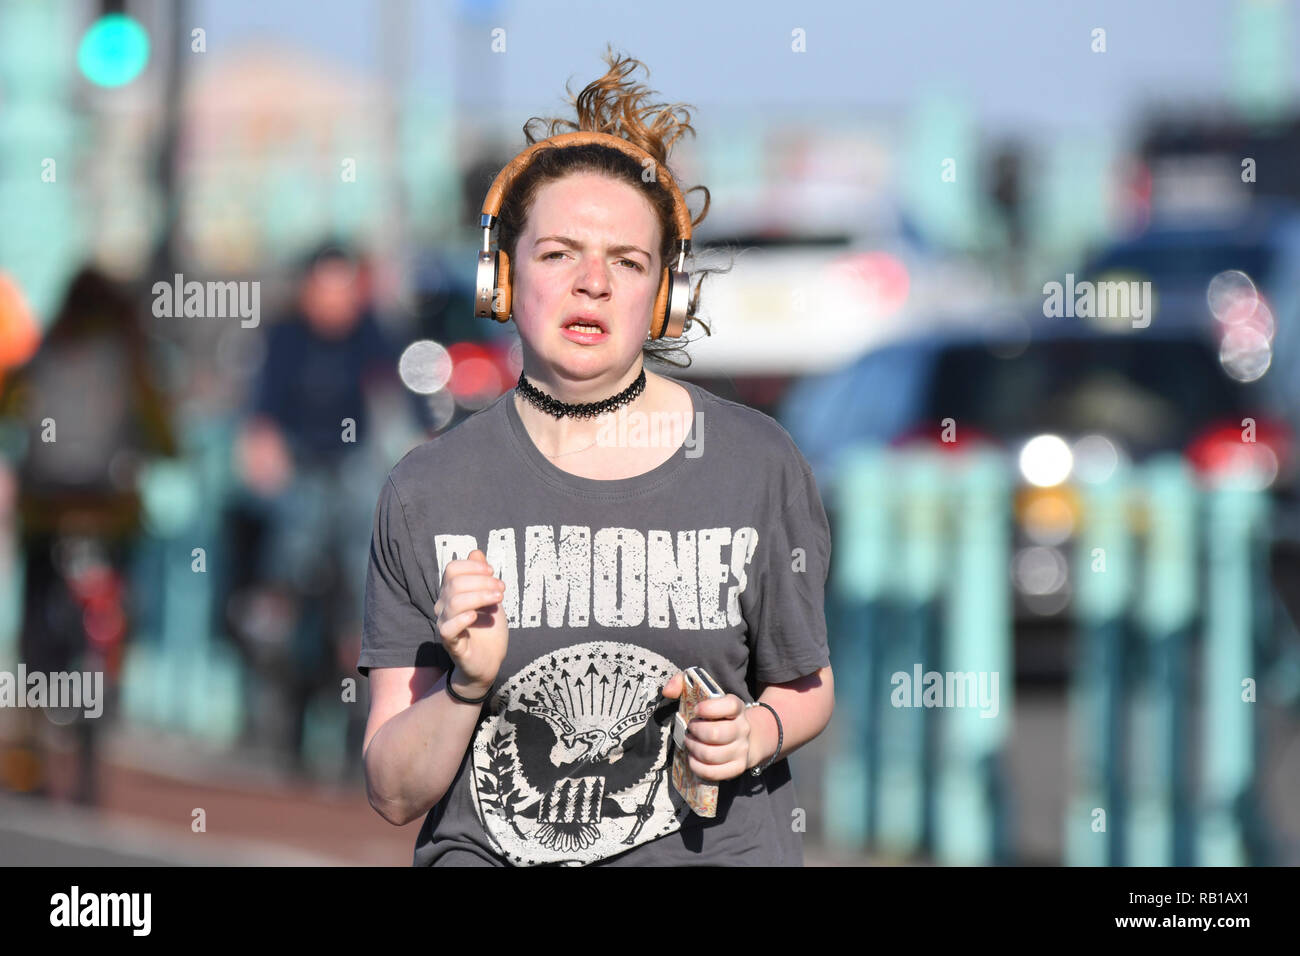 Young woman jogging towards camera wearing headphones, looking hot and sweaty. Stock Photo